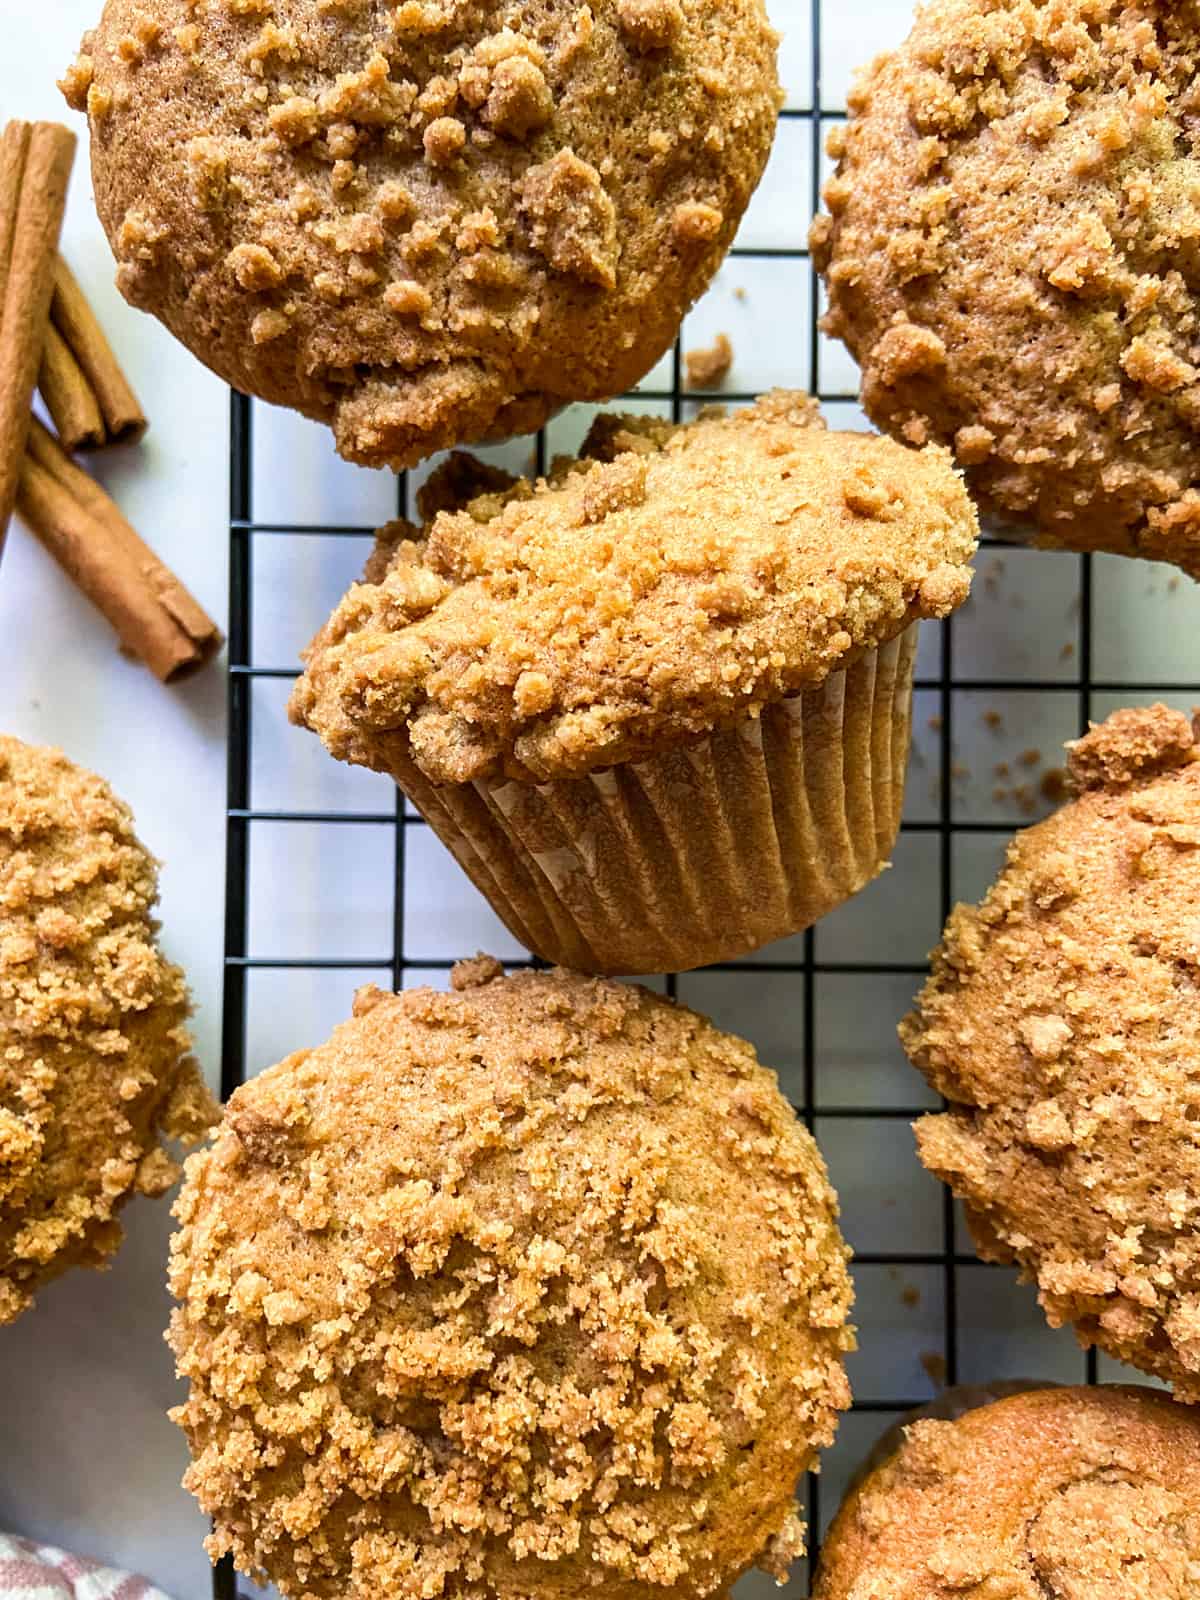 Cinnamon streusel muffins on a cooling rack.